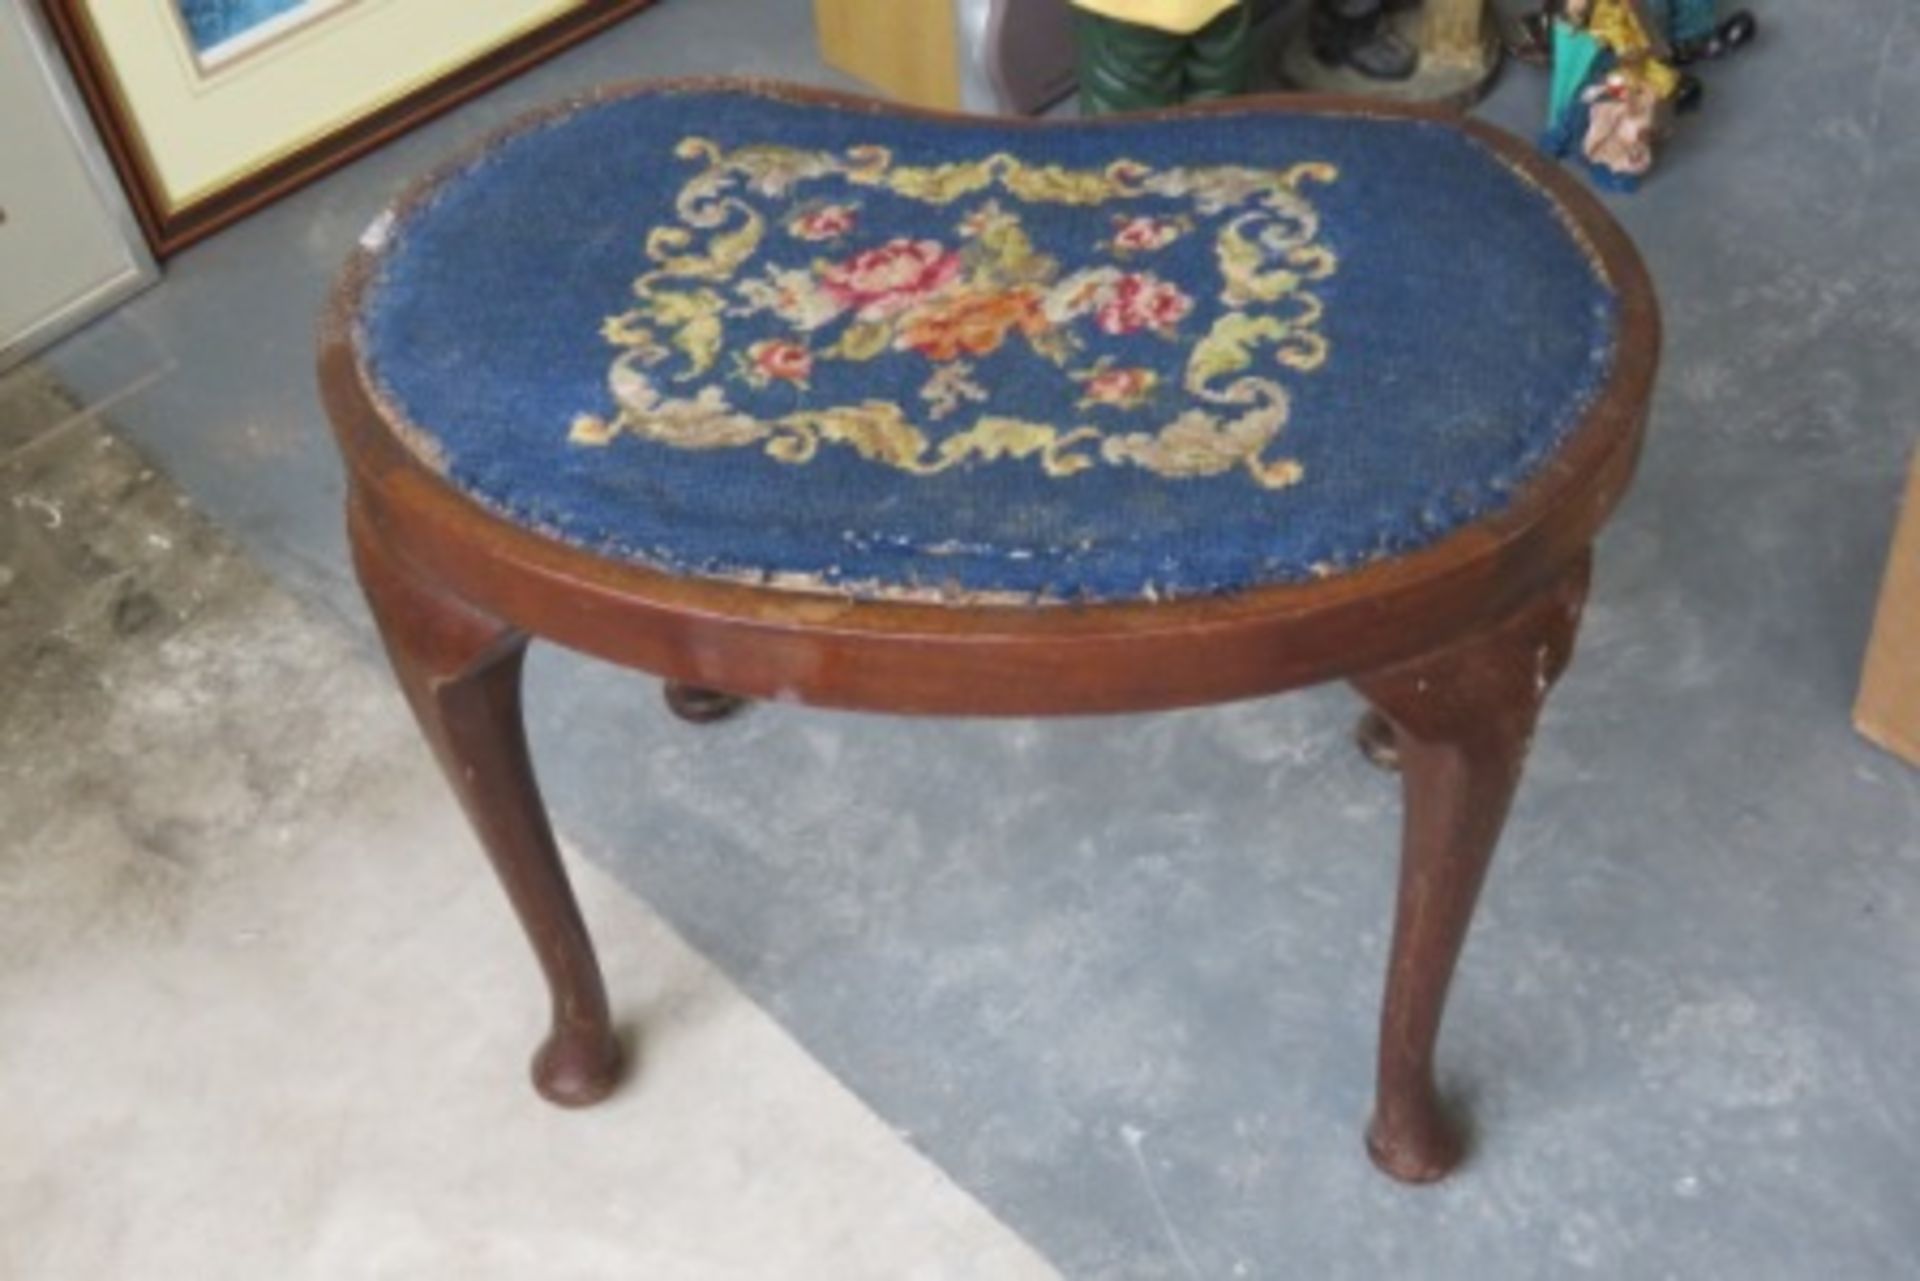 Vintage Cross Stitched Stool - Image 2 of 2